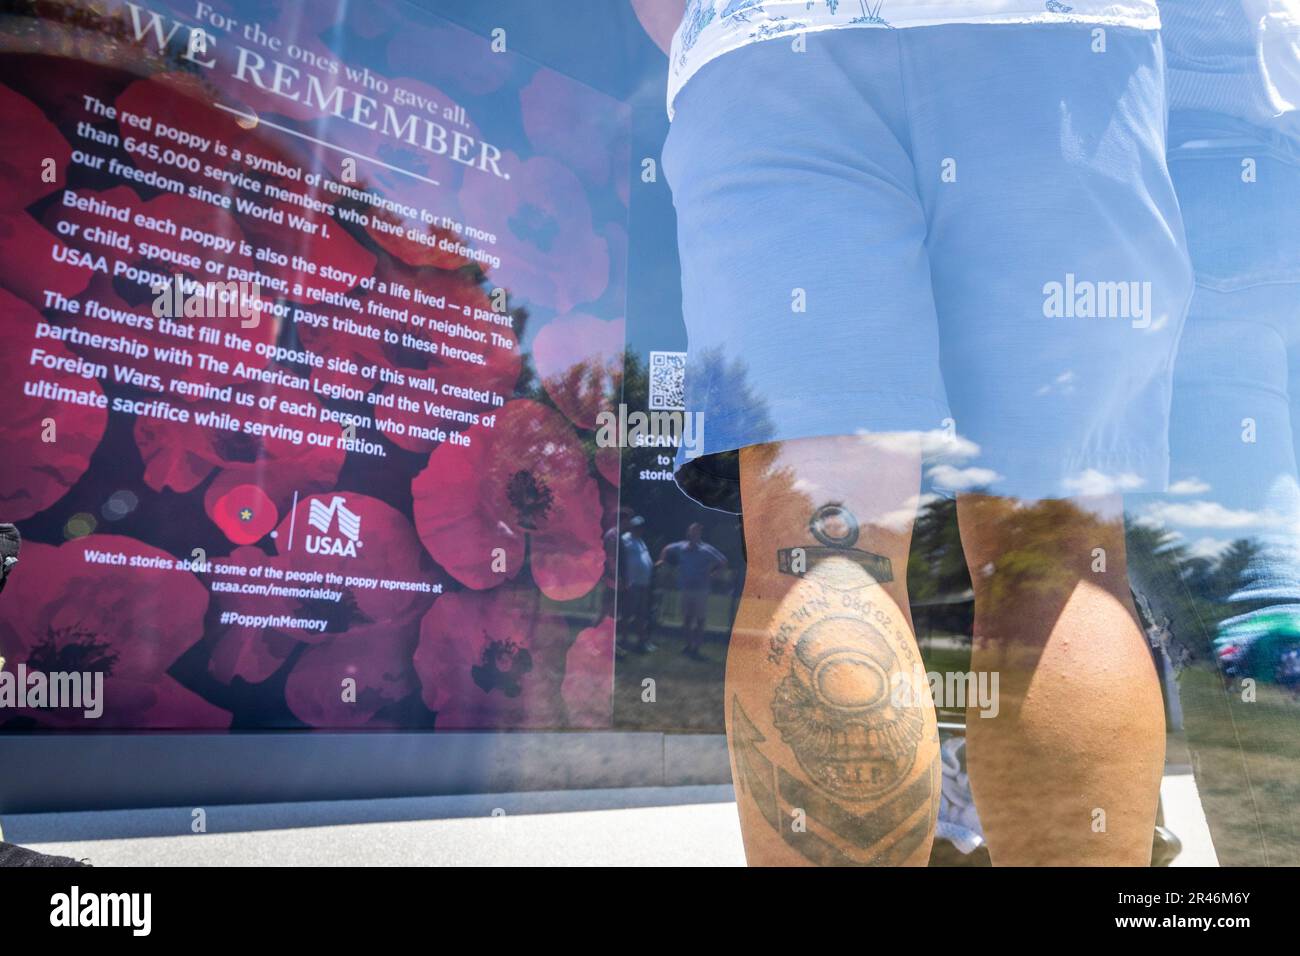 IMAGES DISTRIBUTED FOR USAA The USAA Poppy Wall of Honor is seen on